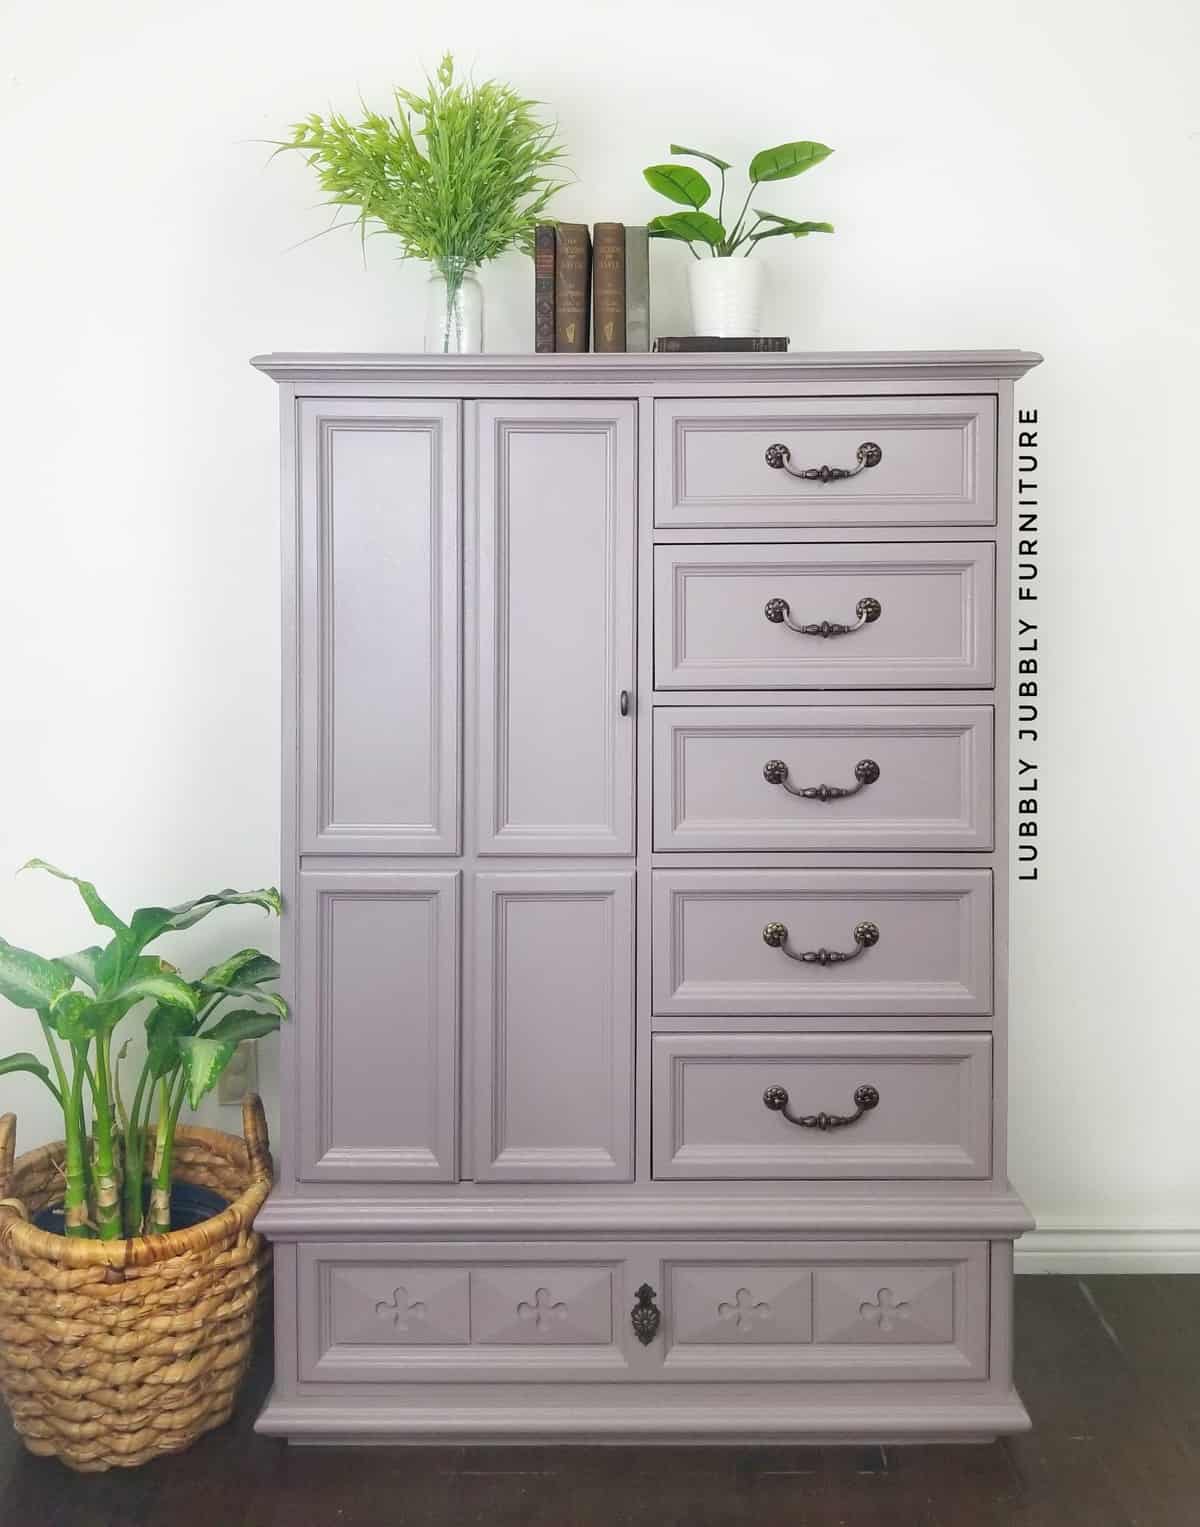 Dusty purple DIY painted wardrobe with eco-friendly furniture paint from Country Chic Paint